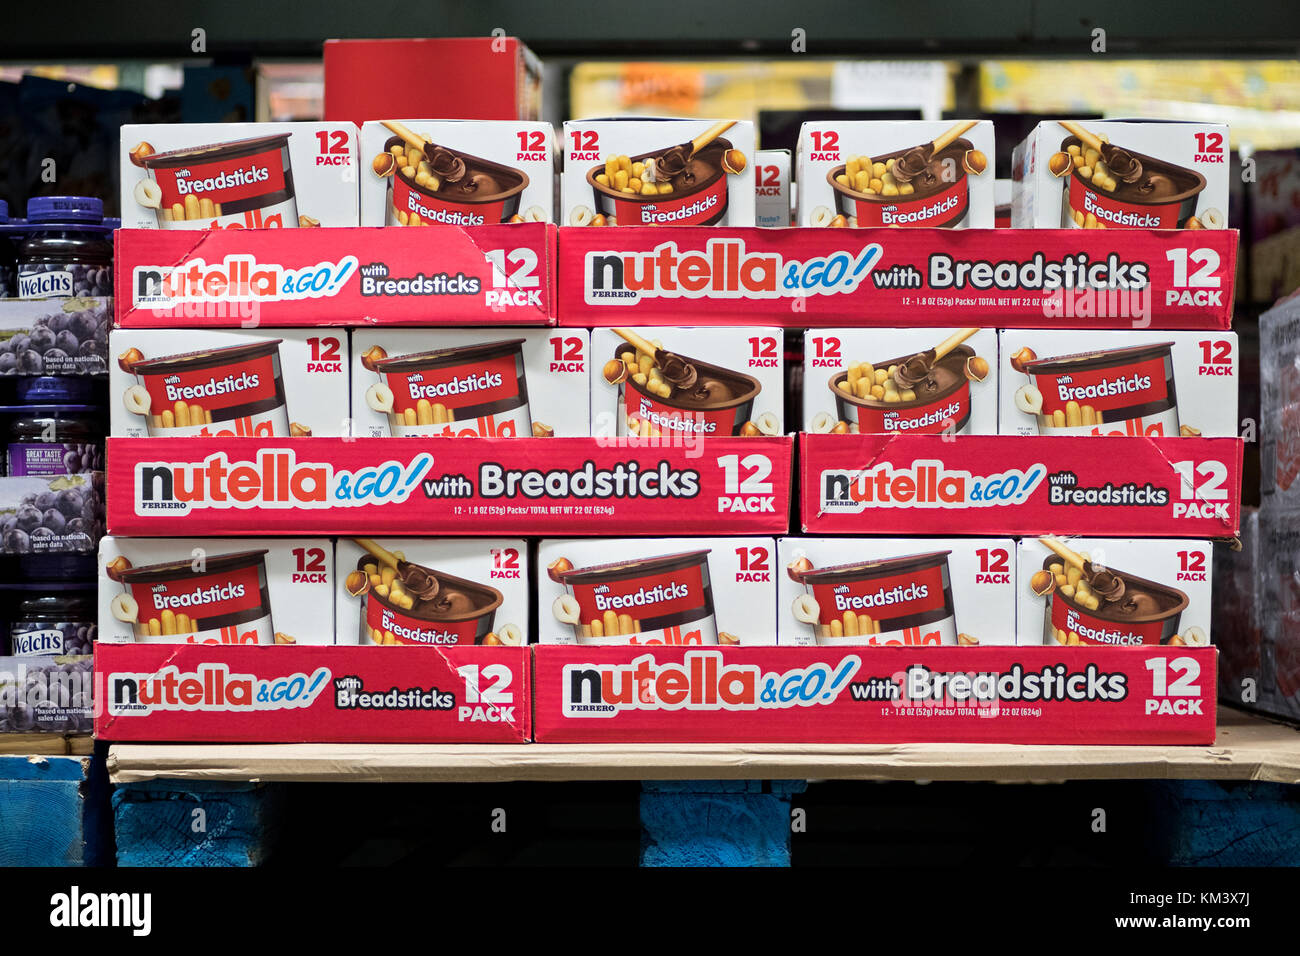 Nutella & Go with breadsticks for sale at BJ's Wholesale Club in Whitestone, Queens, New York. Stock Photo